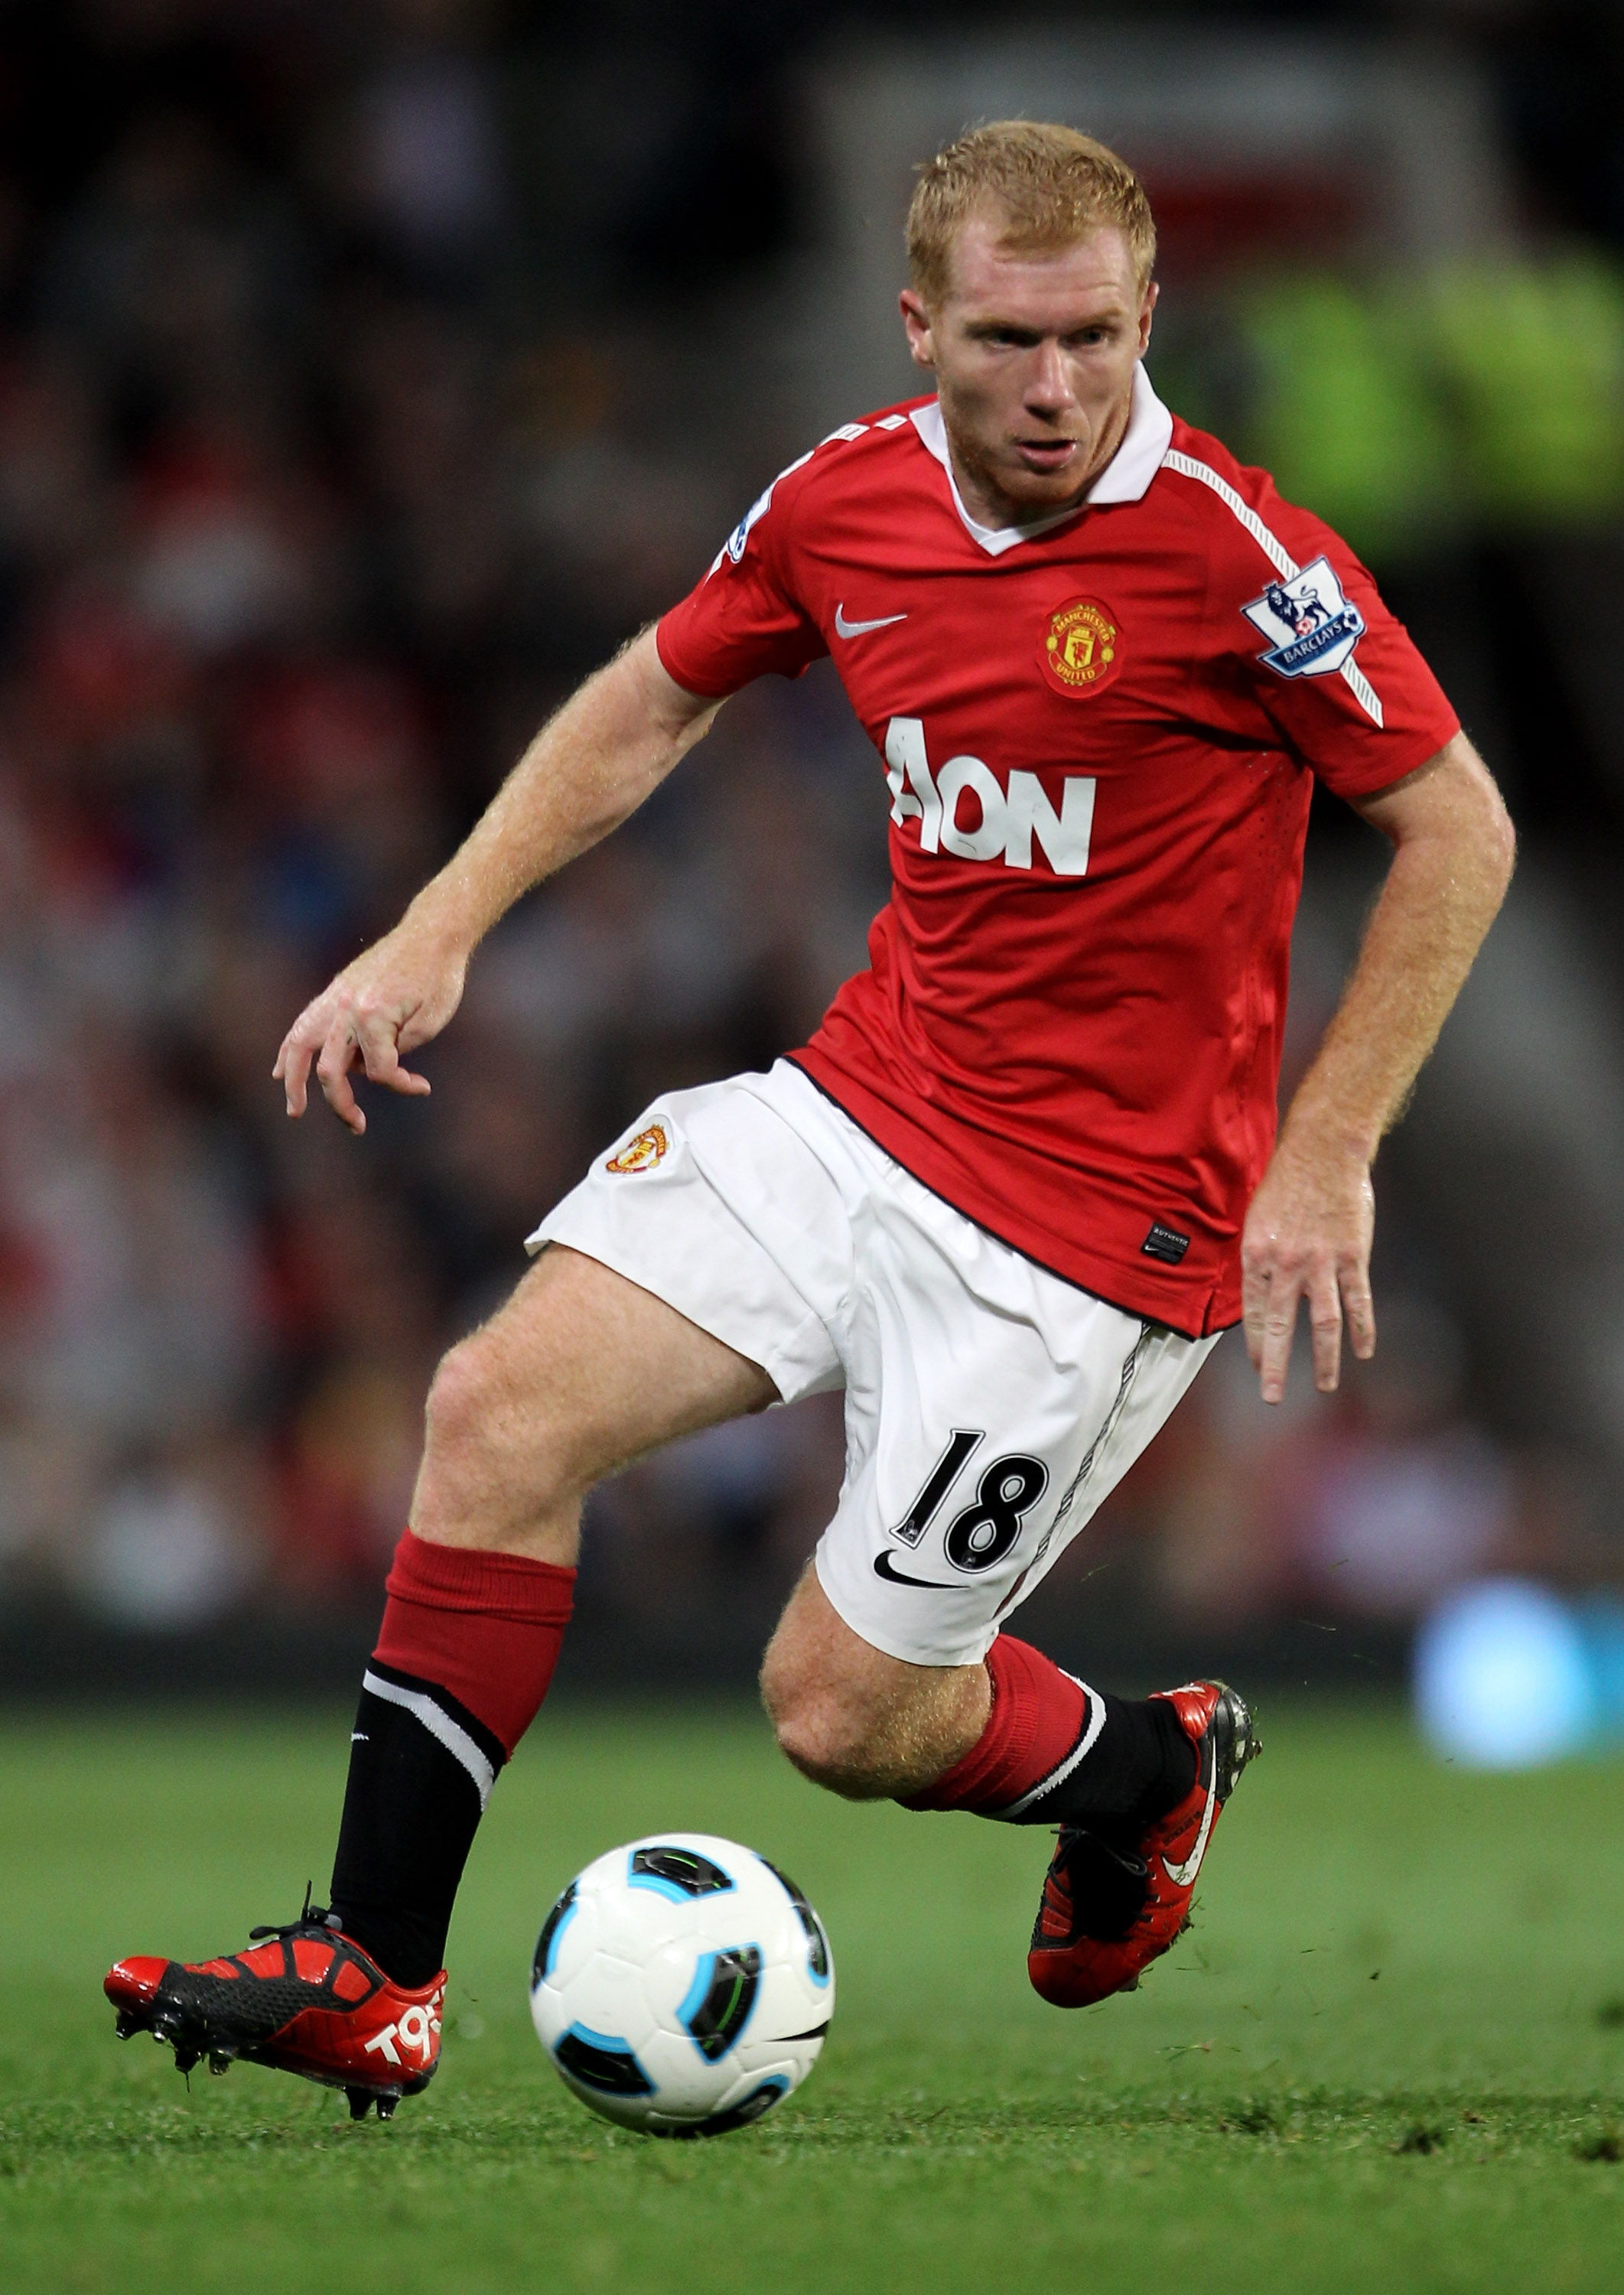 MANCHESTER, ENGLAND - AUGUST 16:  Paul Scholes of Manchester United in action during the Barclays Premier League match between Manchester United and Newcastle United at Old Trafford on August 16, 2010 in Manchester, England.  (Photo by Alex Livesey/Getty